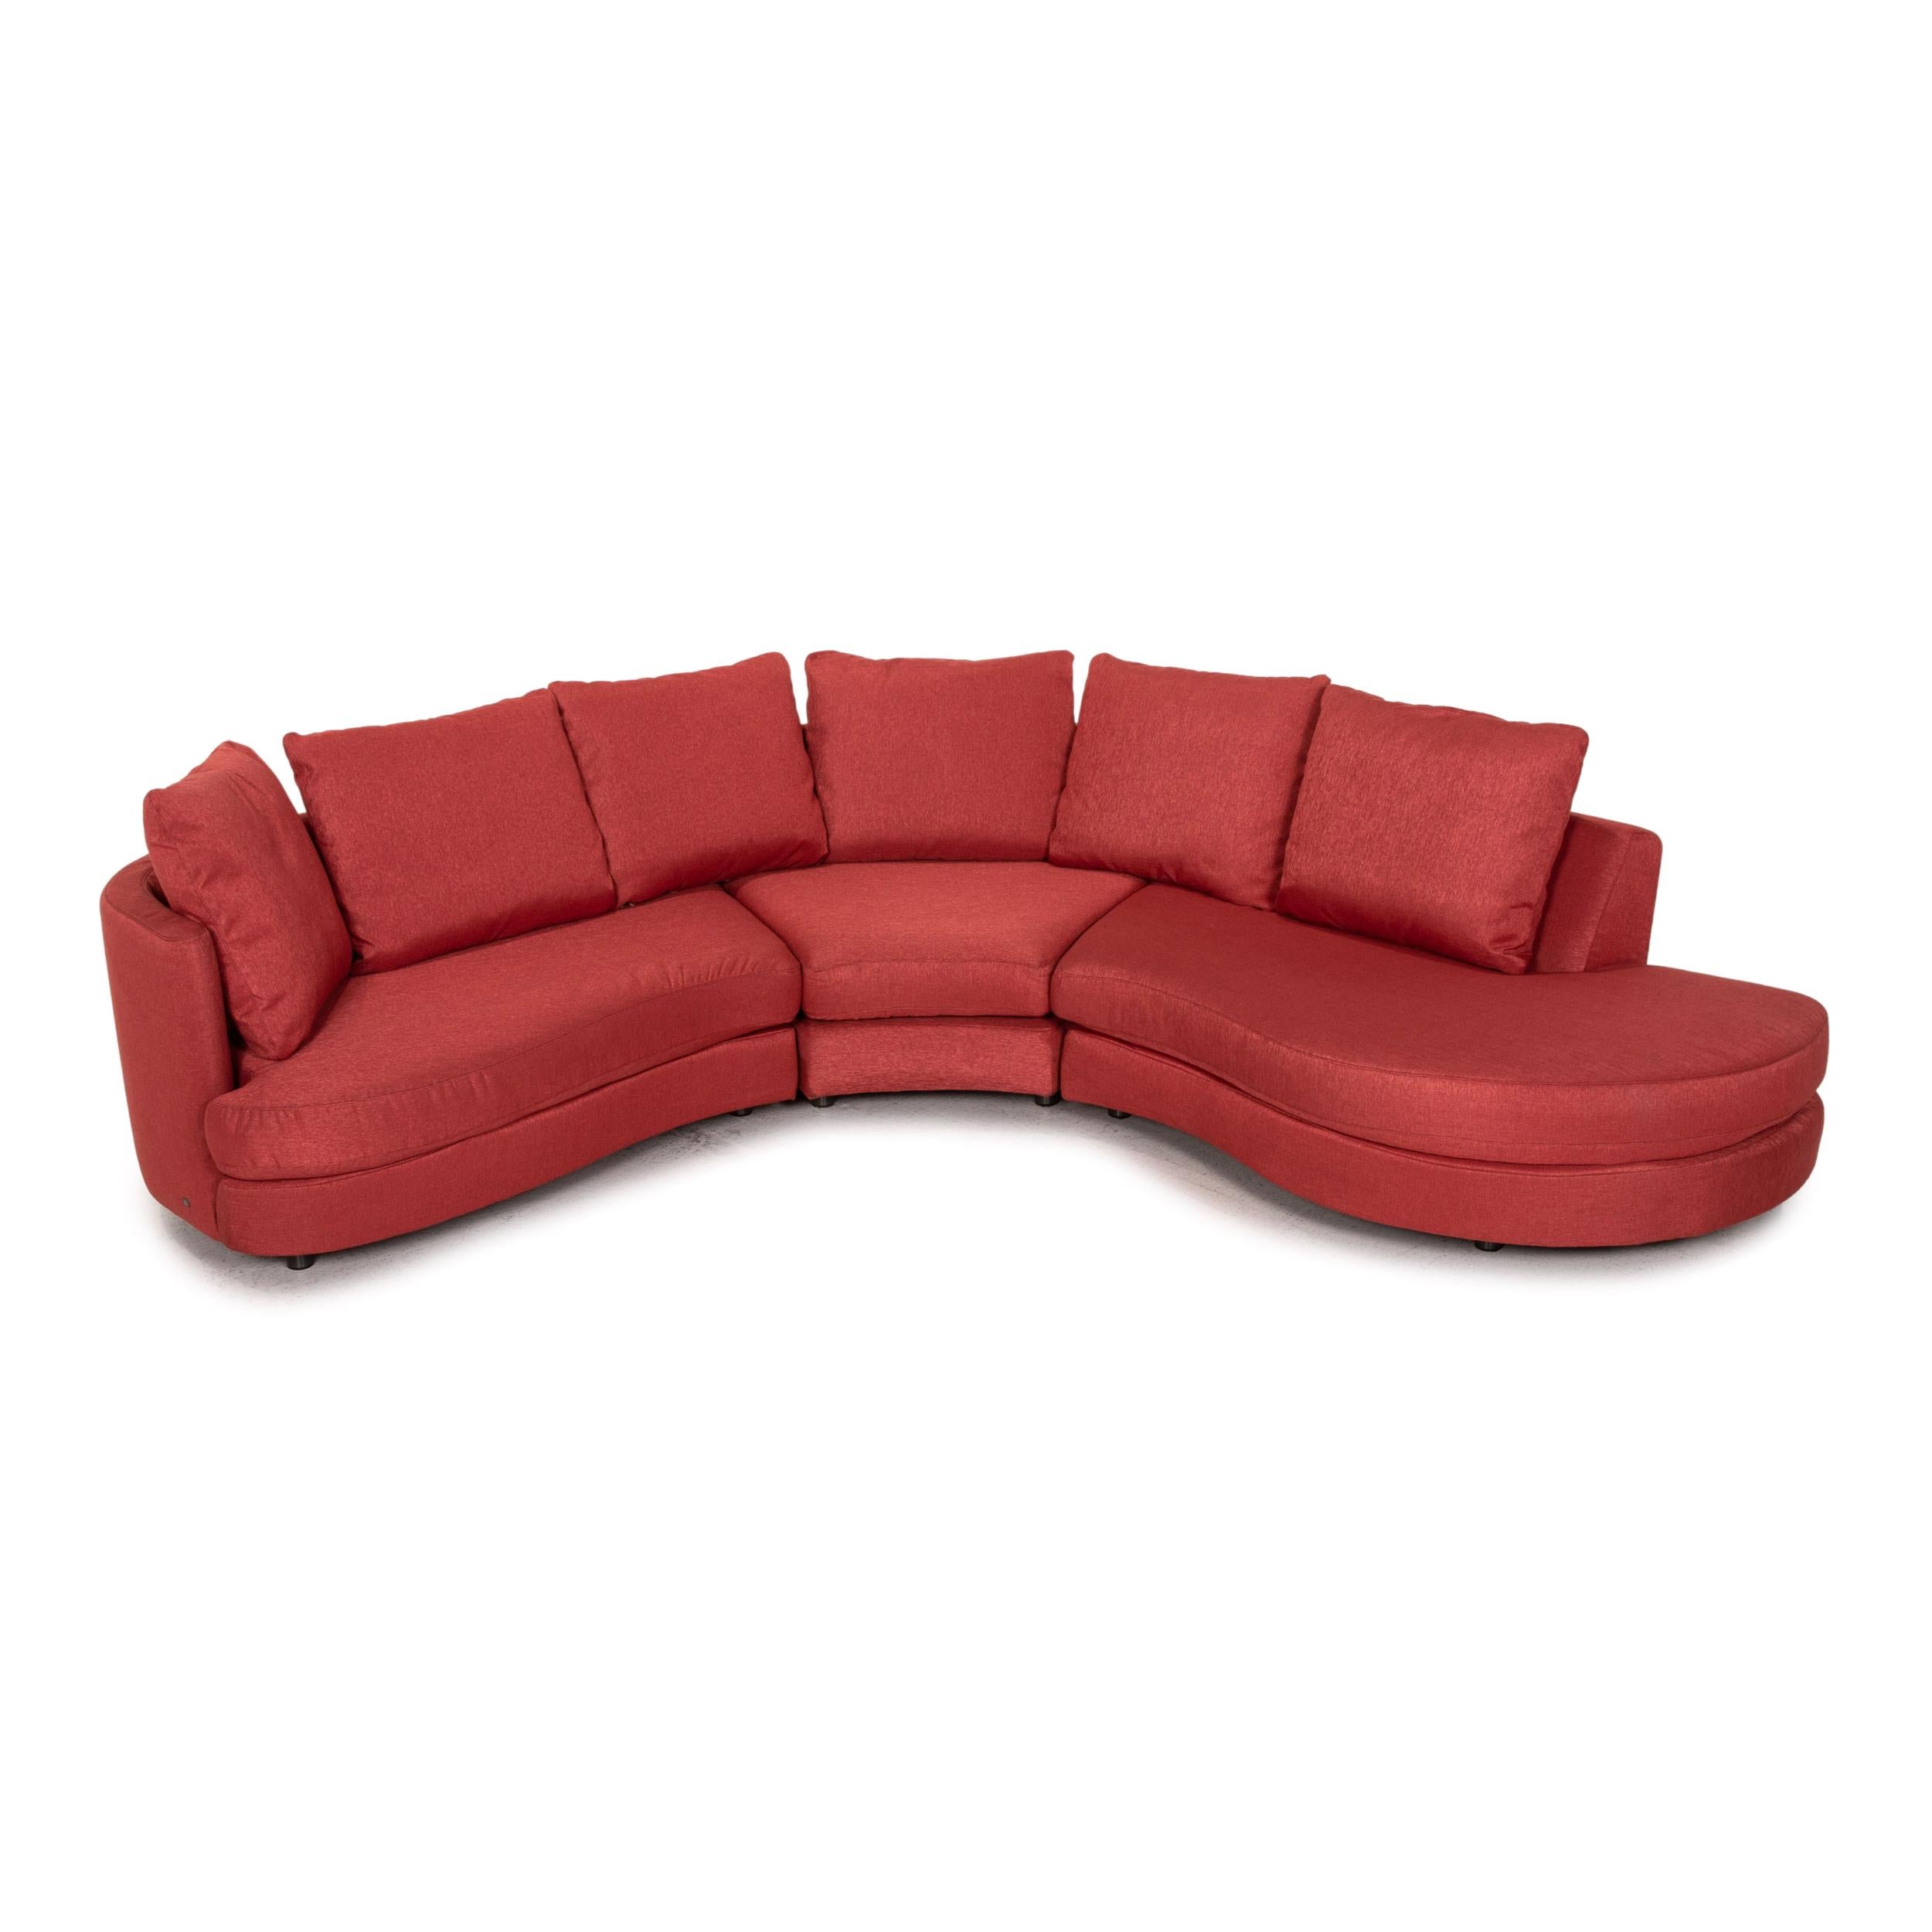 German Rolf Benz Fabric Corner Sofa Red Sofa Couch For Sale